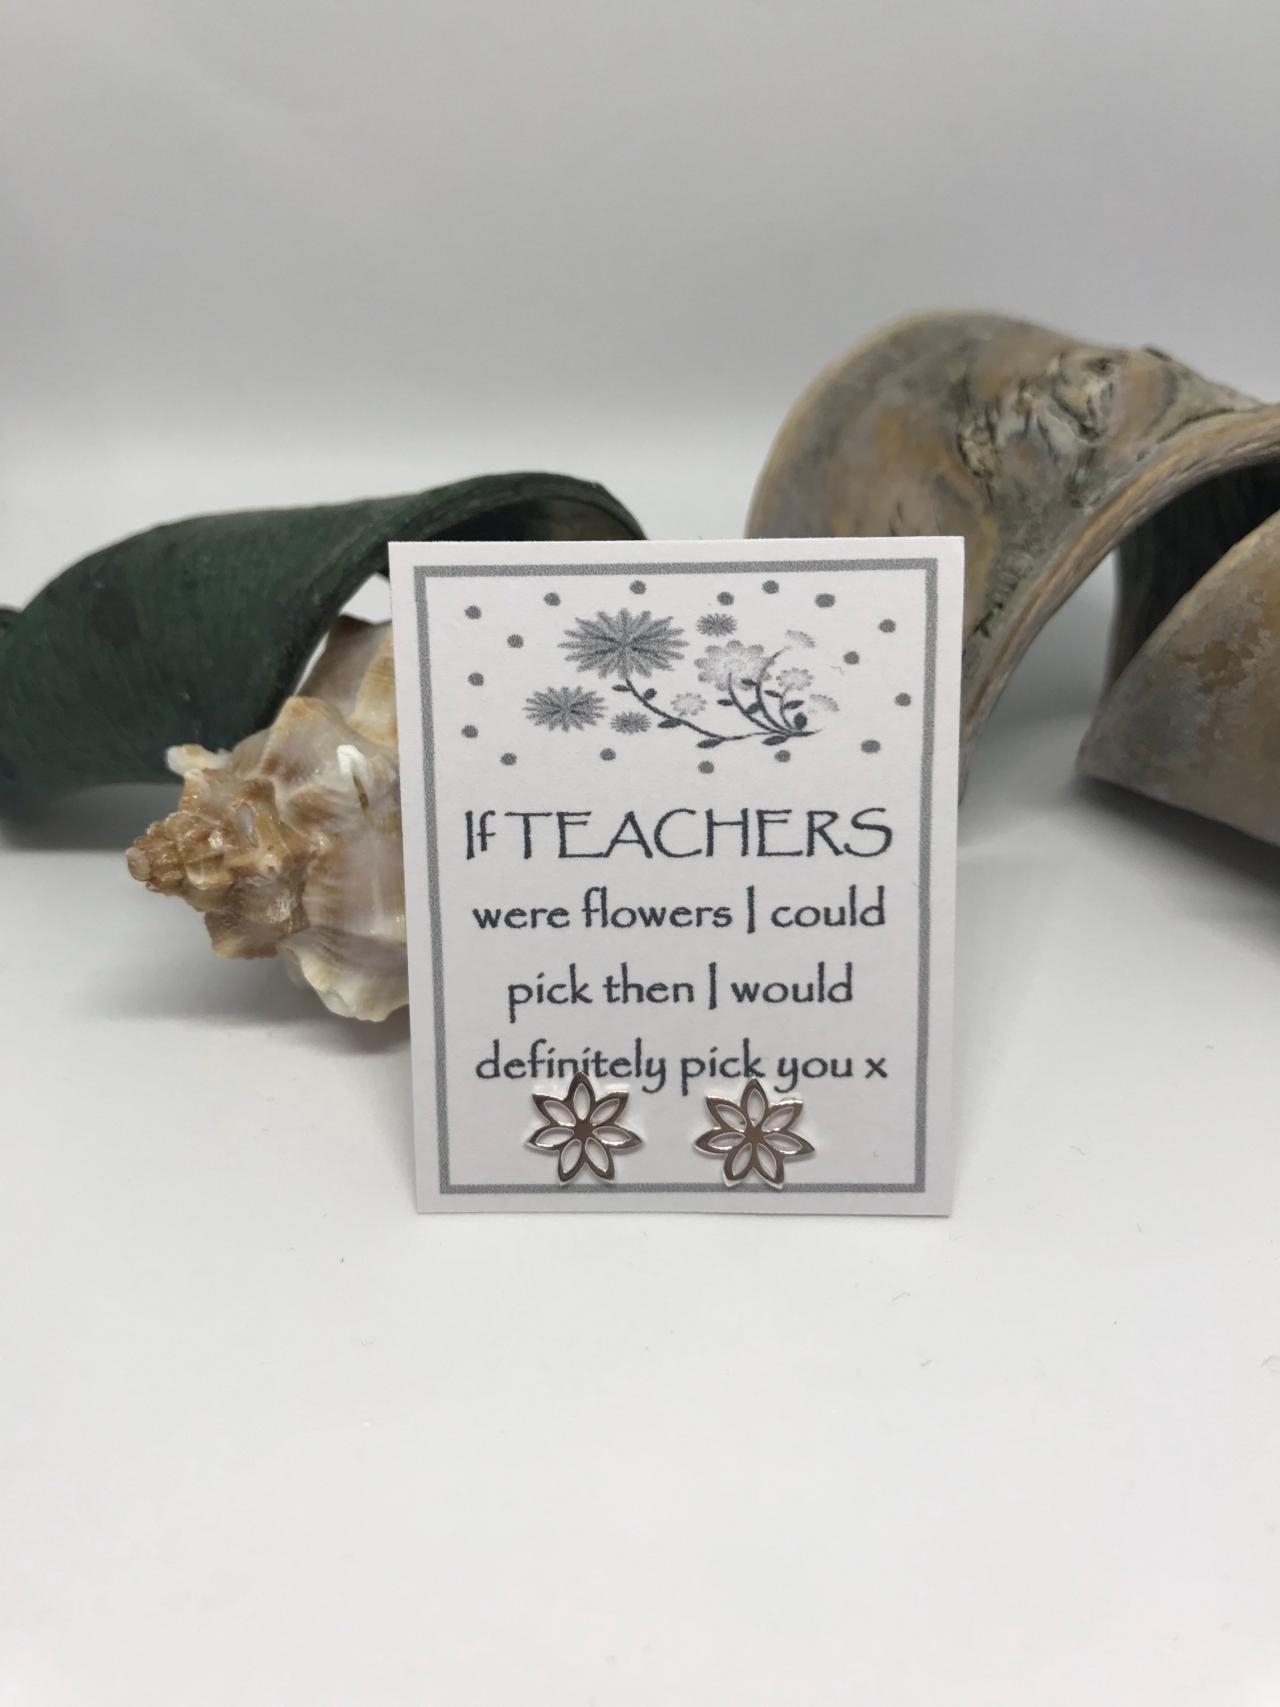 Teacher Earrings A Perfect Gift For A Teacher Sterling Silver Flower Stud Earrings With Teacher Thank You Message